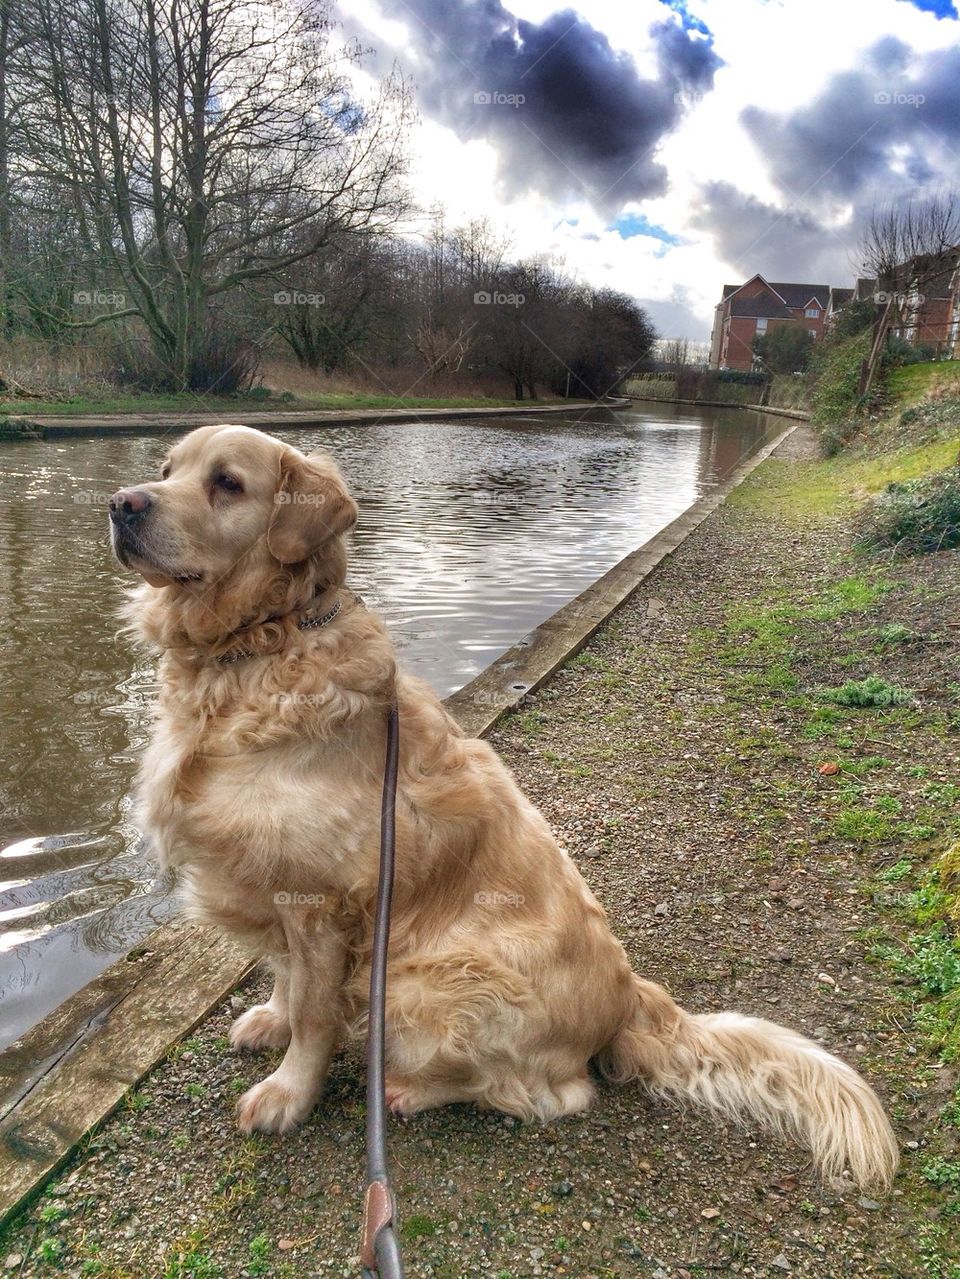 Nocas posing at the canal